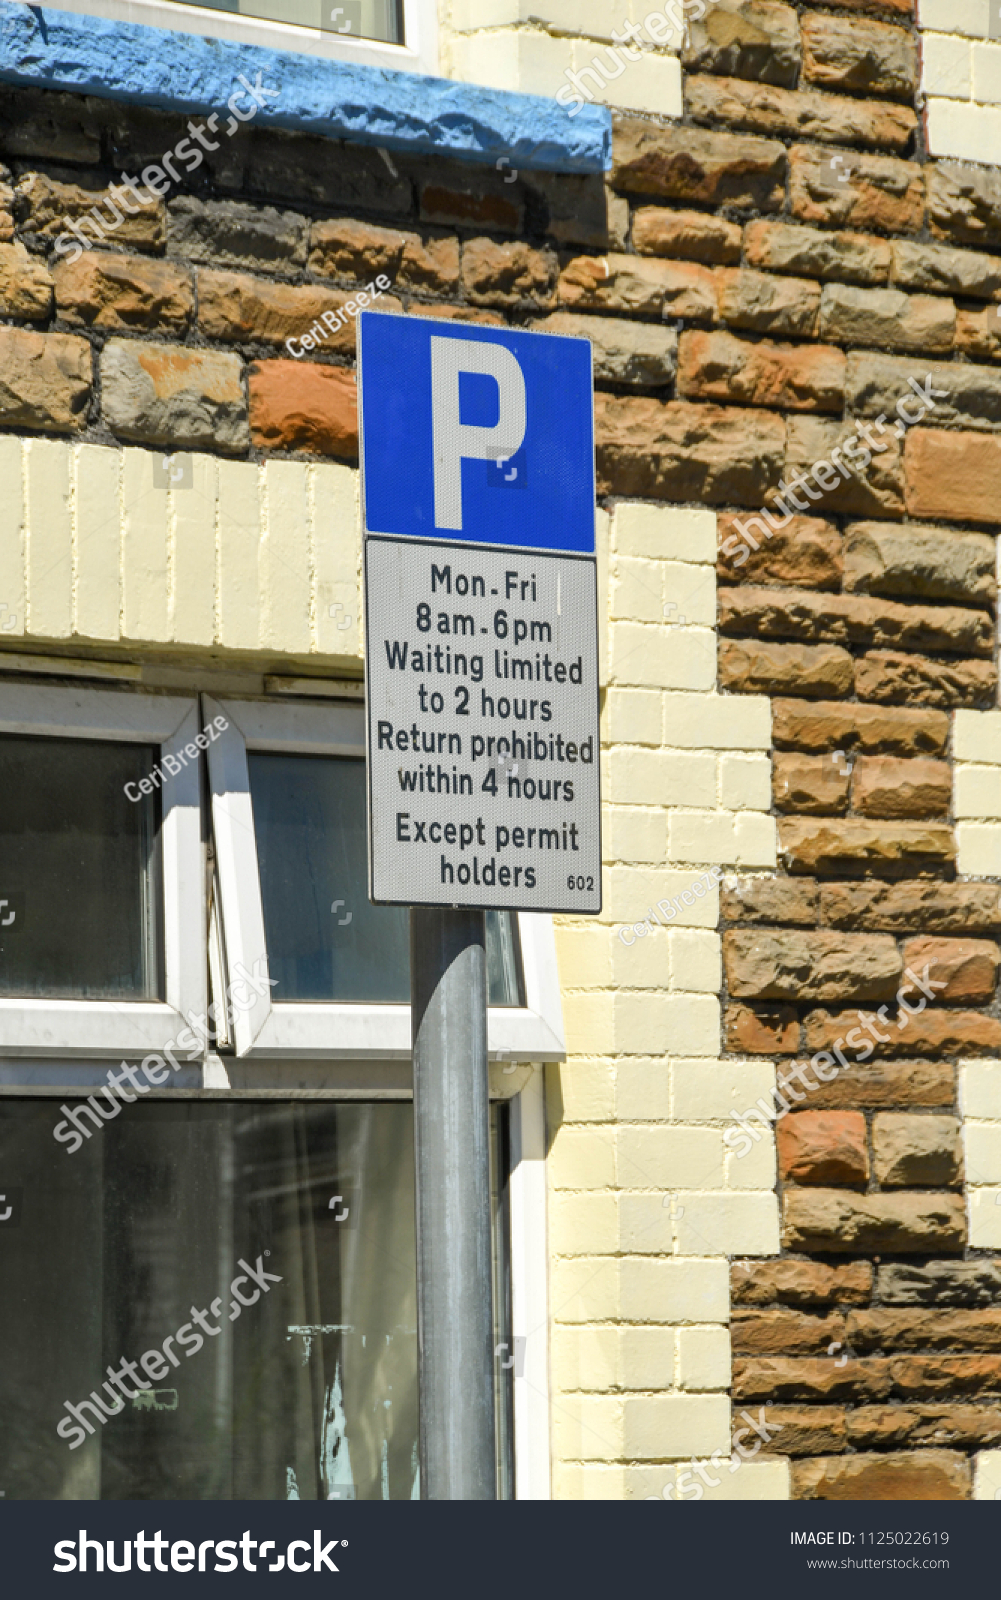 TREFOREST, PONTYPRIDD, WALES - JUNE 2018: Close up view of a sign in a residential street with information on parking restrictions for non-permit holders #1125022619